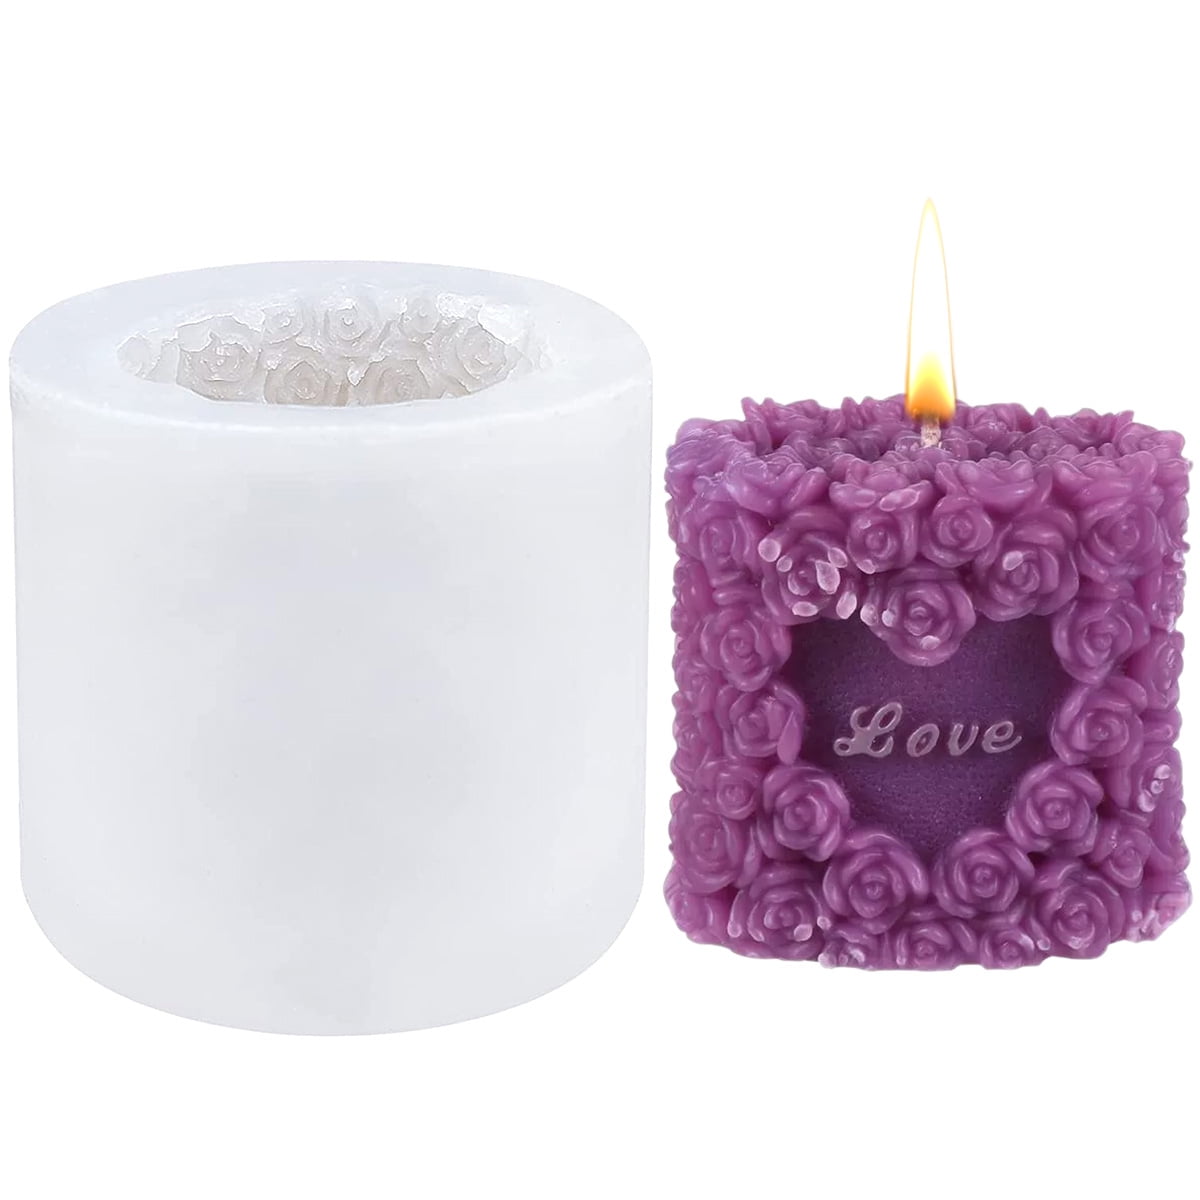 Details about   12 Flower Heart Rose Star Shape Silicone Mould Candle Wax Cake Choc Fondant Soap